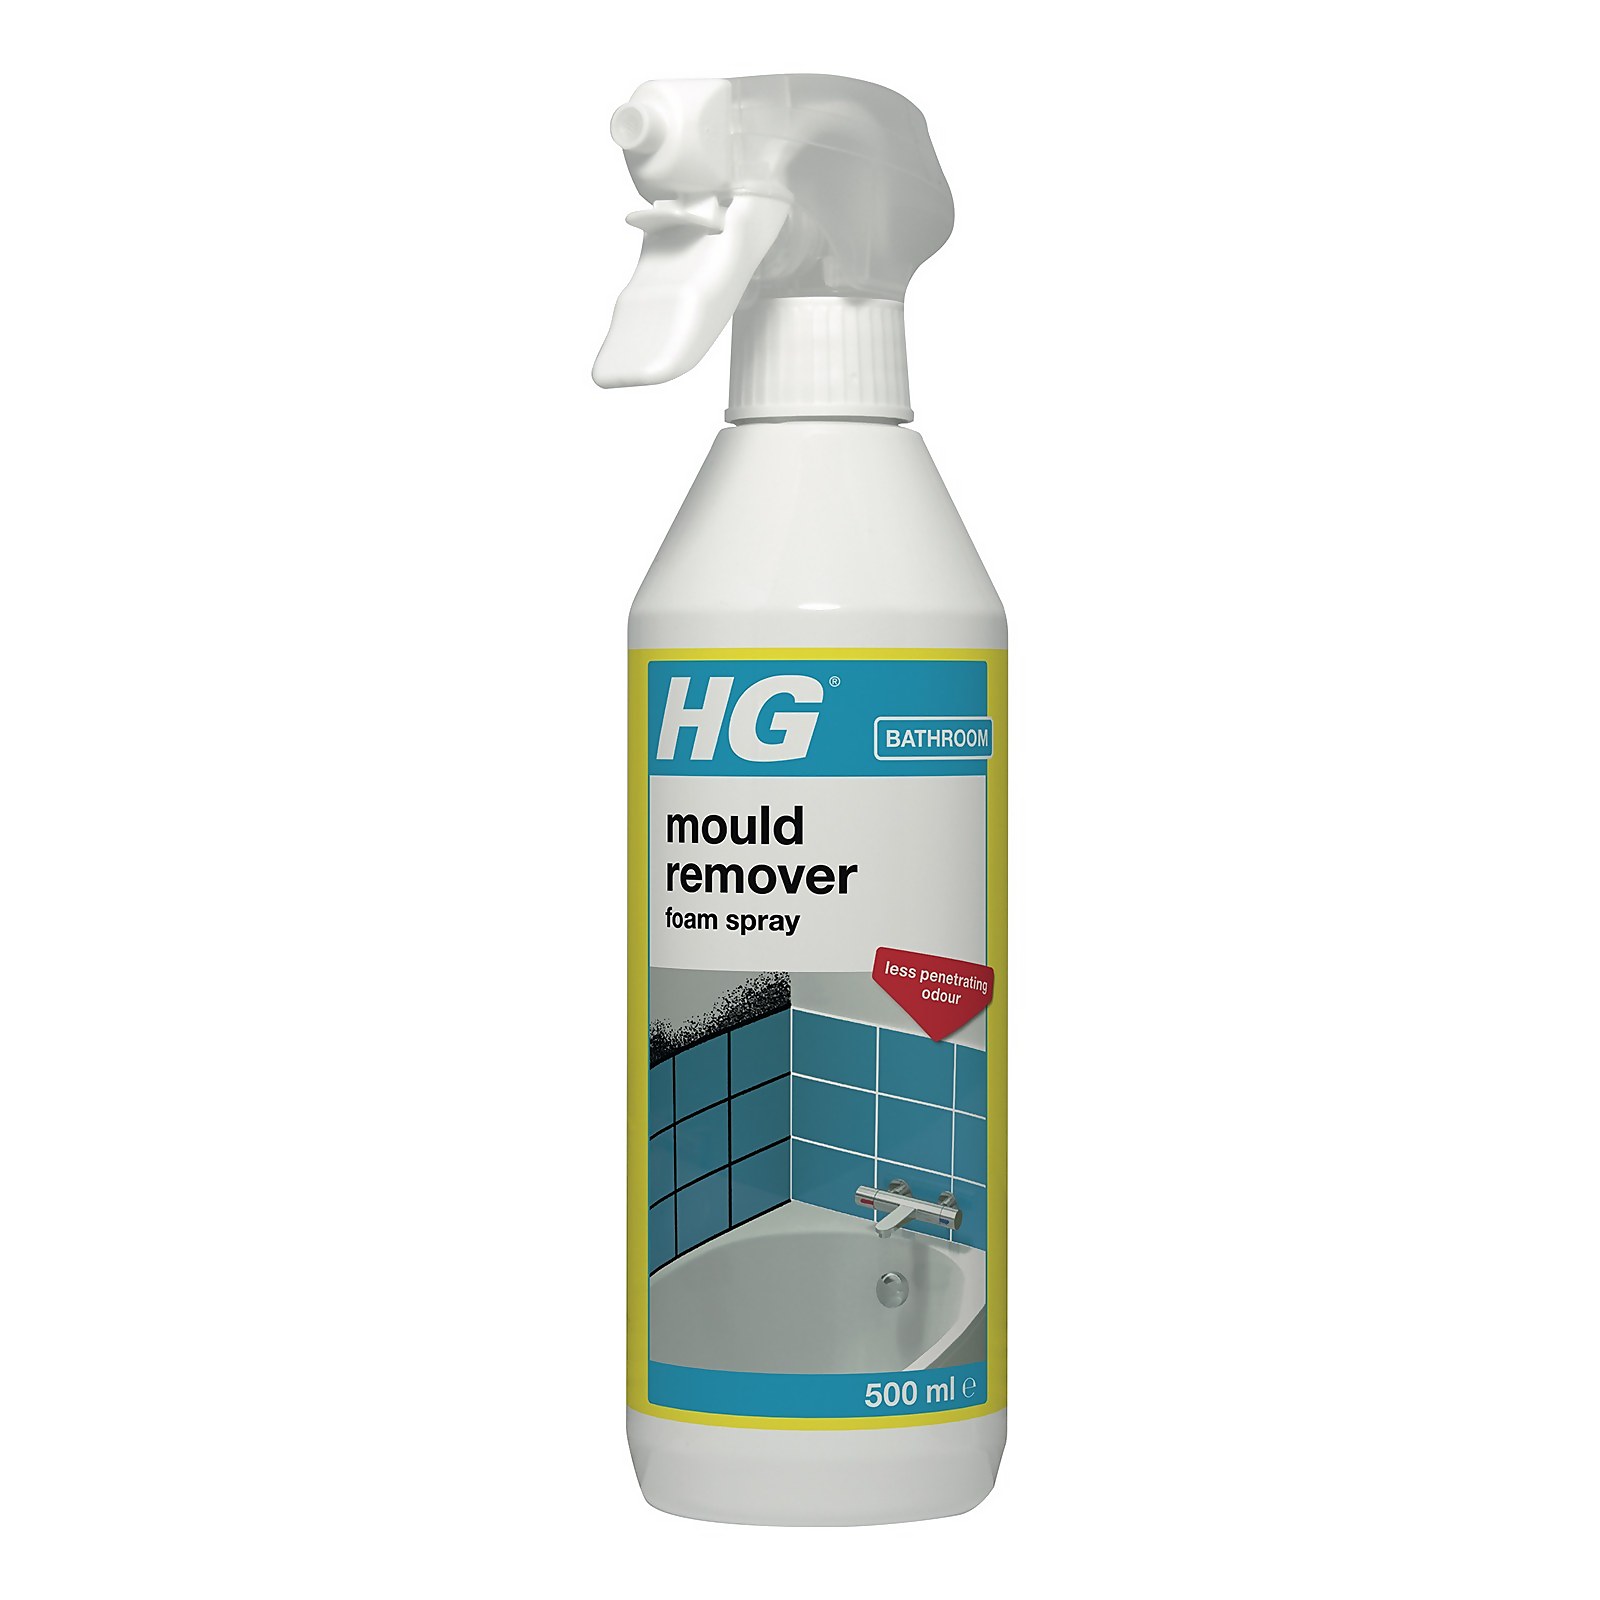 Photo of Hg Mould Remover Foam Spray - 500ml